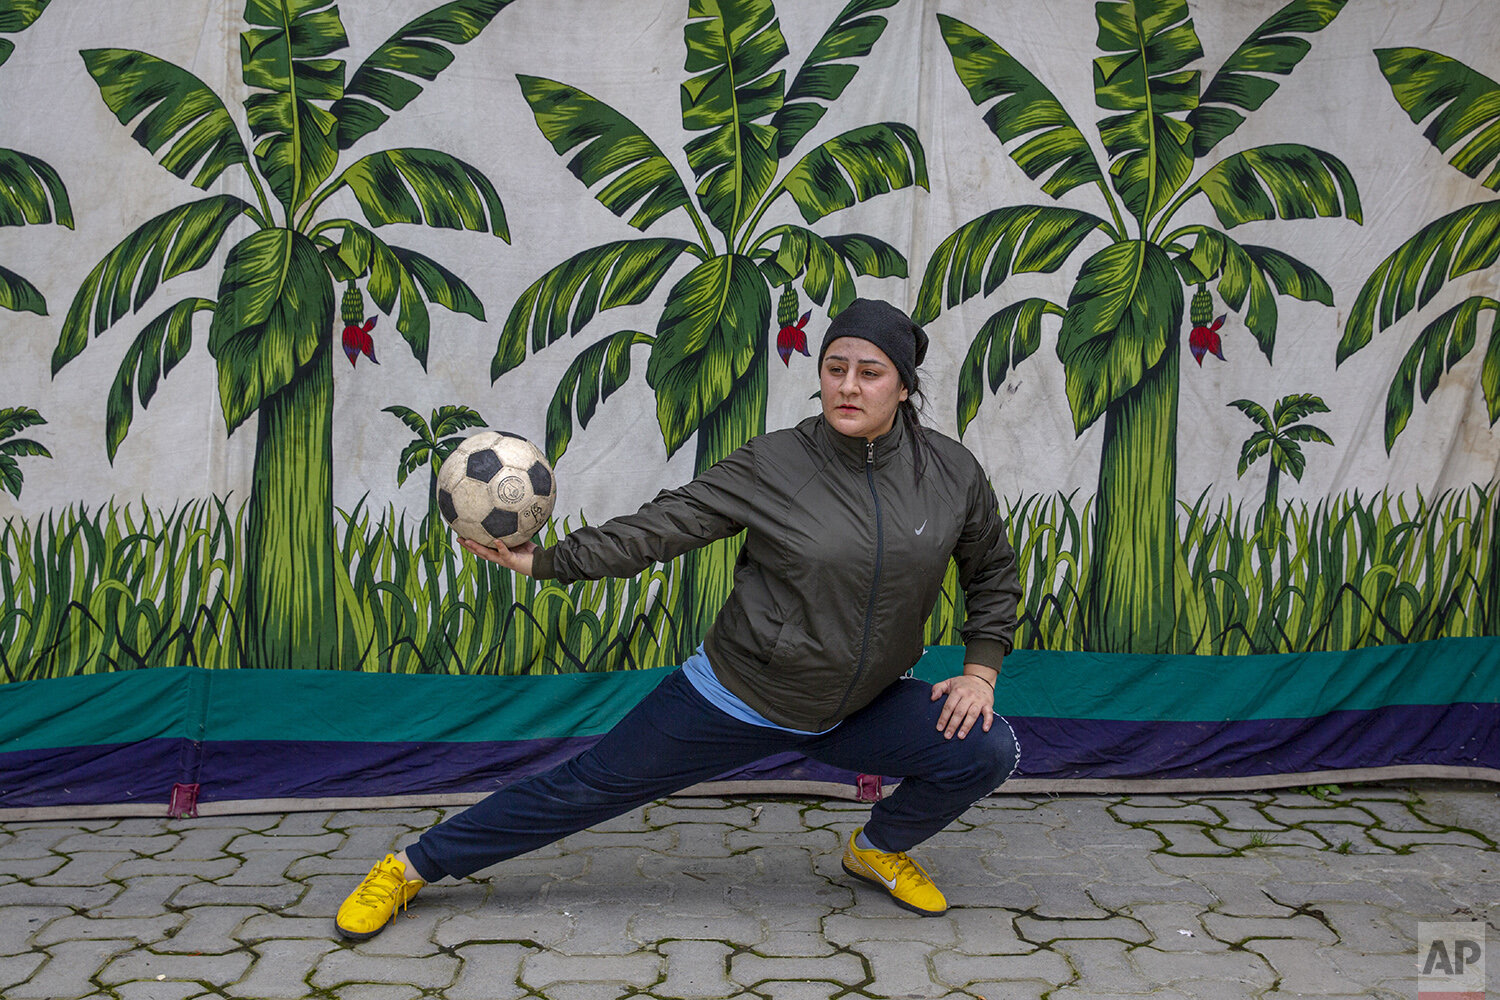  Kashmiri football coach Qudsiya Altaf poses for a photograph during practice inside a school compound that belongs to her father, near her home in Srinagar, Indian controlled Kashmir, April 20, 2020. Like many other athletes, the coronavirus pandemi